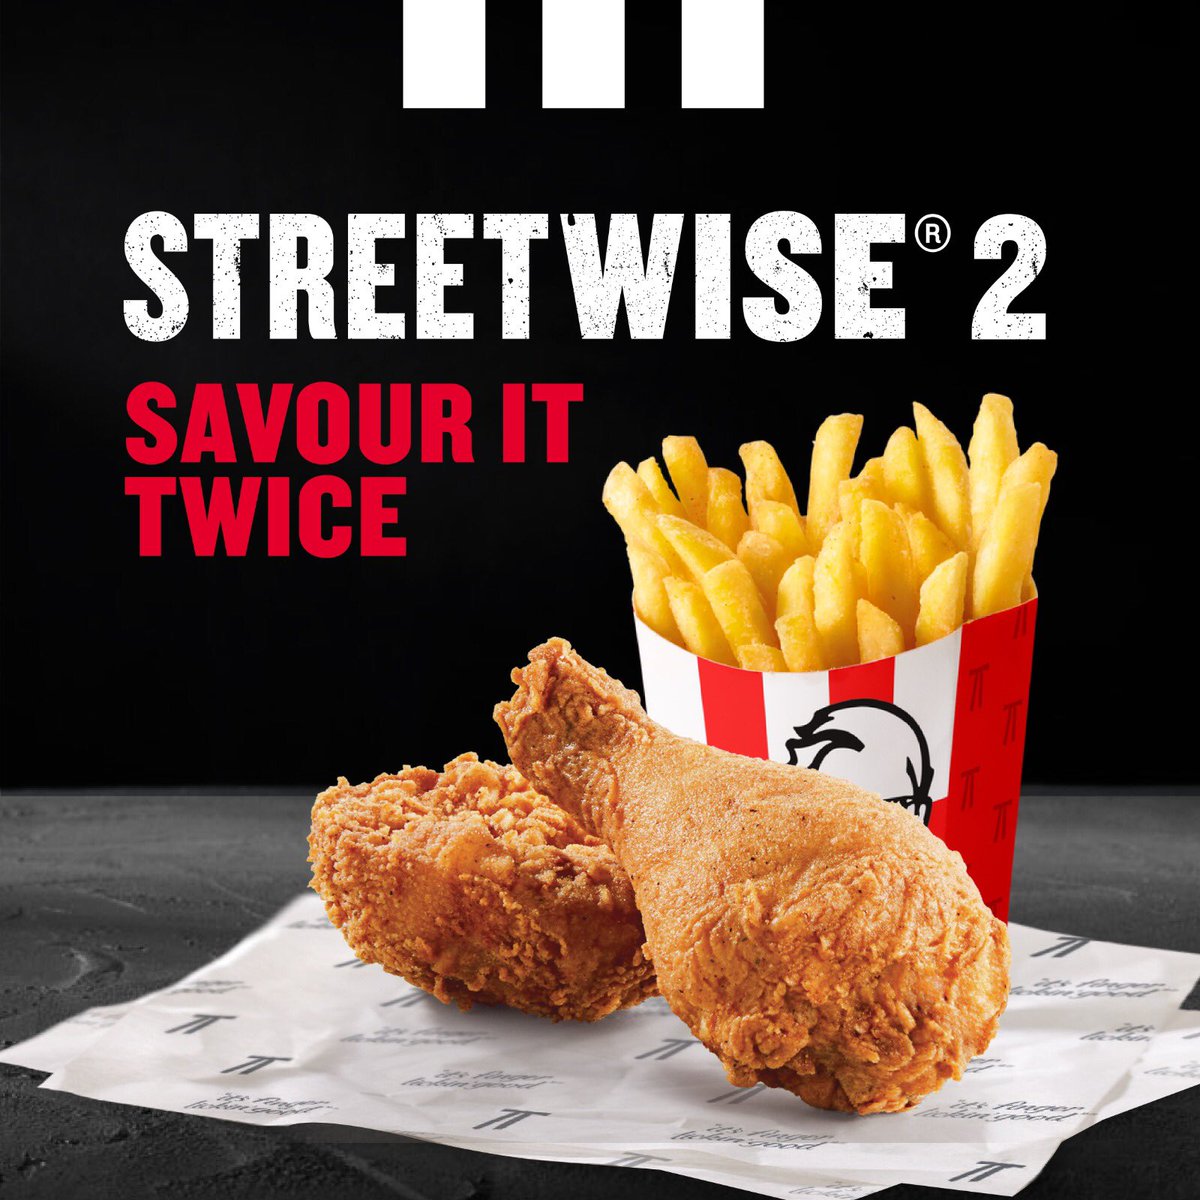 Savour it twice! Experience the finest crispy drumsticks in town, not just one, but a pair. Available for dine-in, takeaway and delivery via our mobile app KFC Rwanda or call us on +250789244860.
🍗🍗 #DoubleDelight
#ItsFingerLickinGood